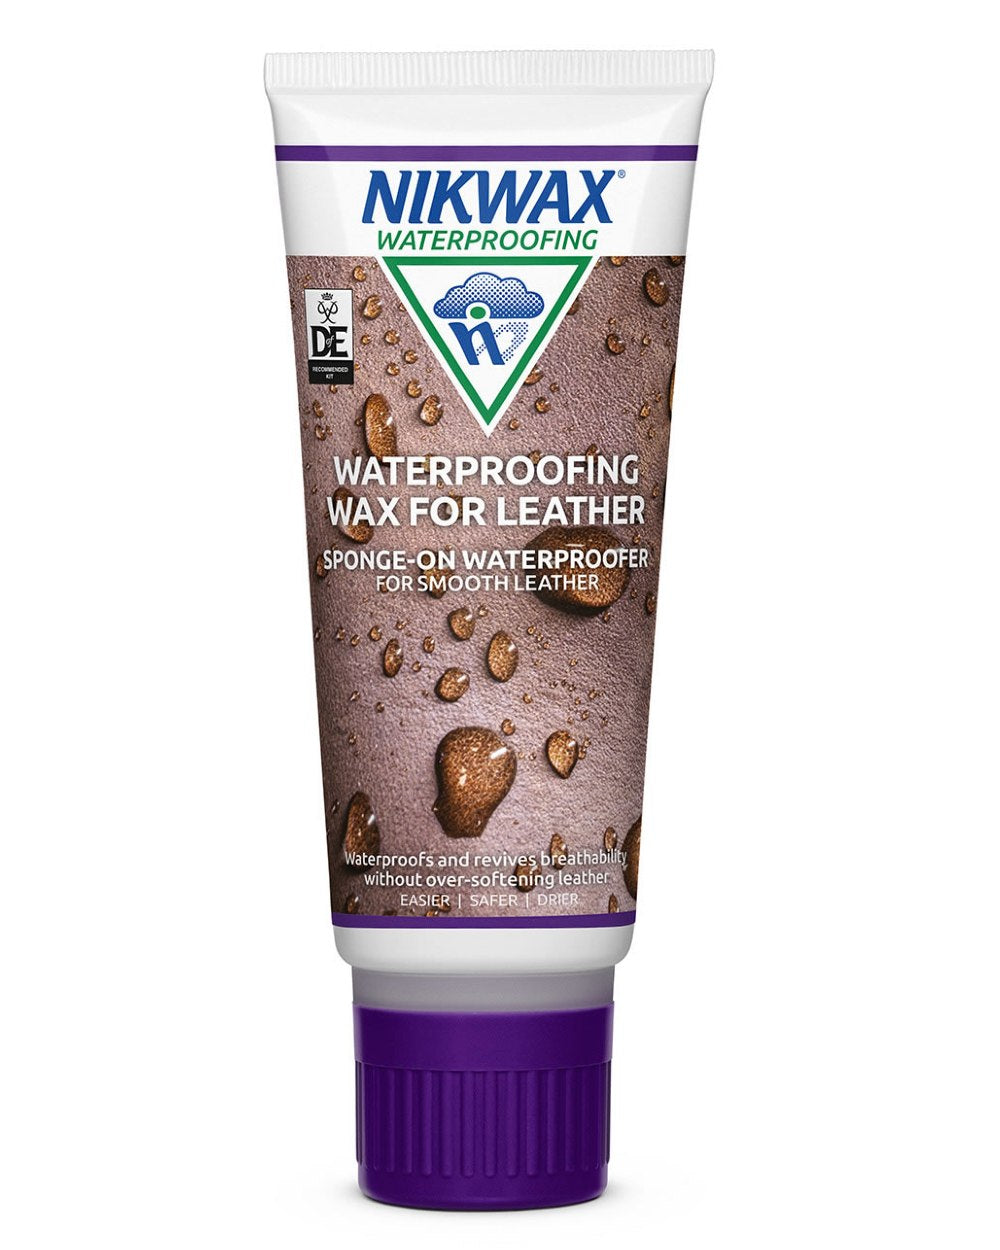 Neutral Coloured Nikwax Waterproofing Wax Cream for Leather On A White Background